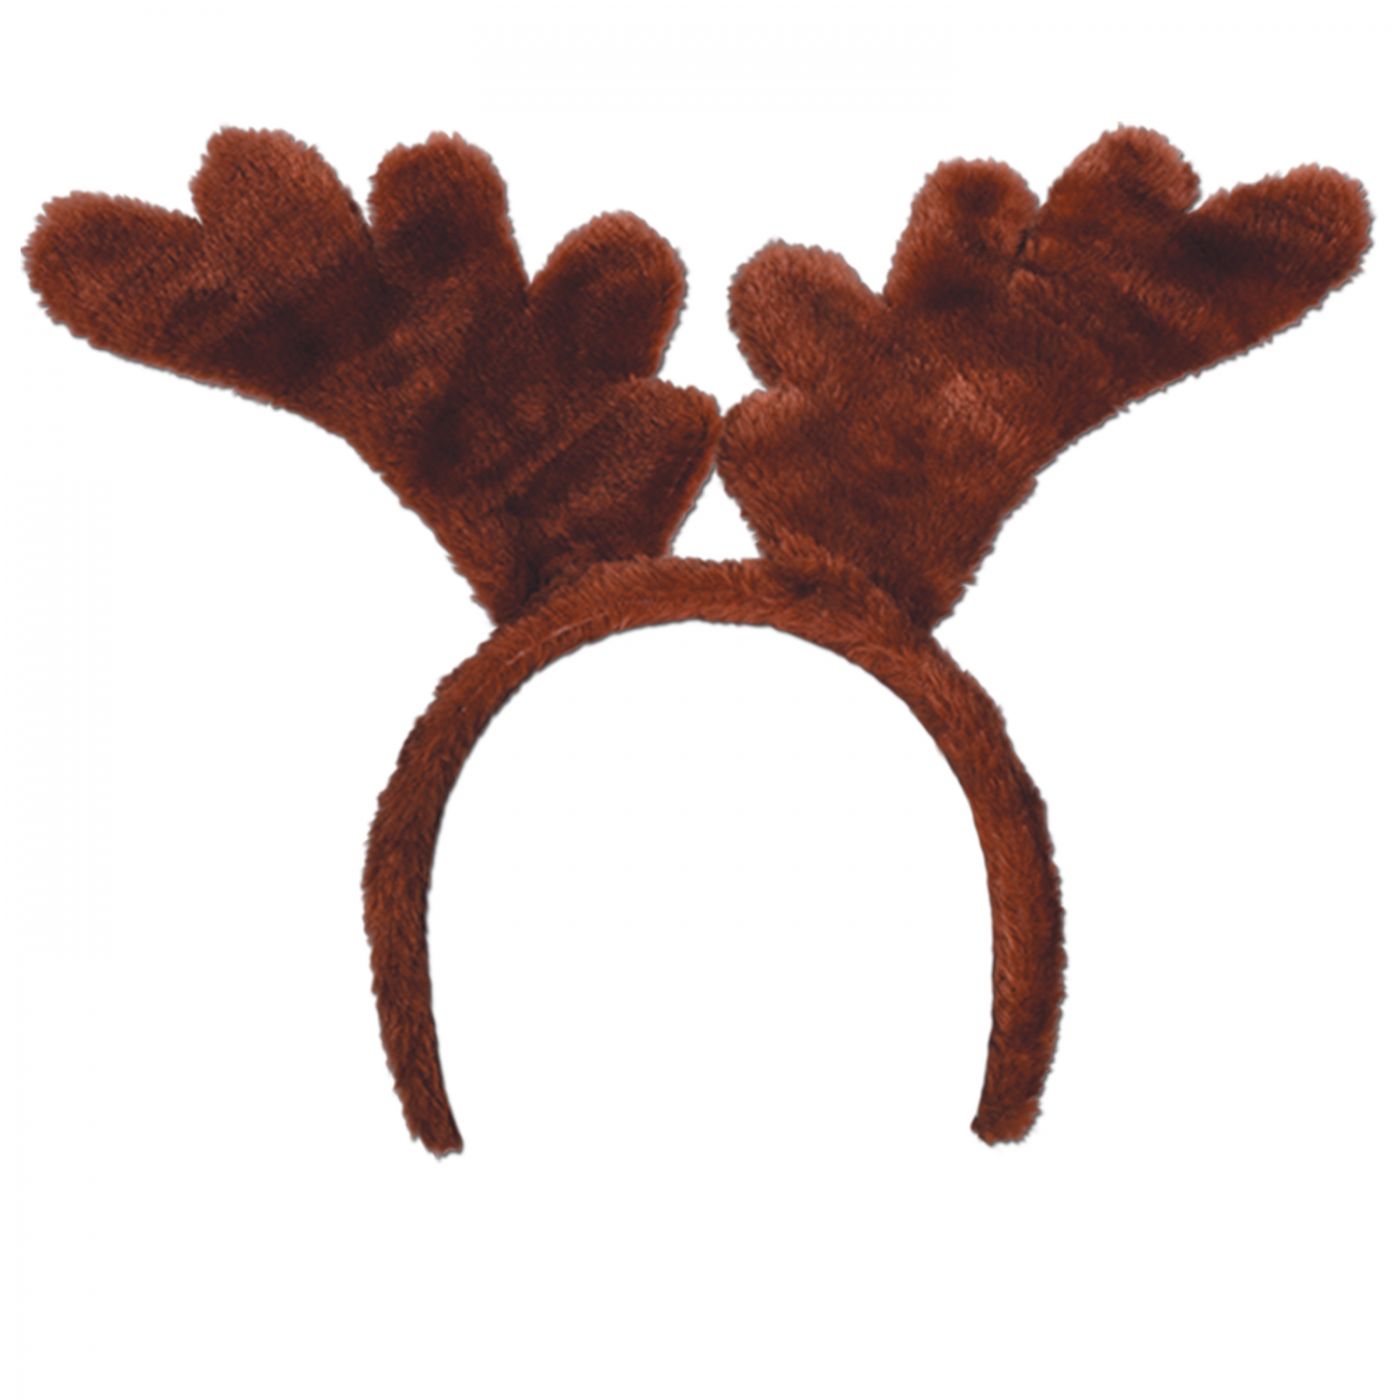 Soft-Touch Reindeer Antlers image